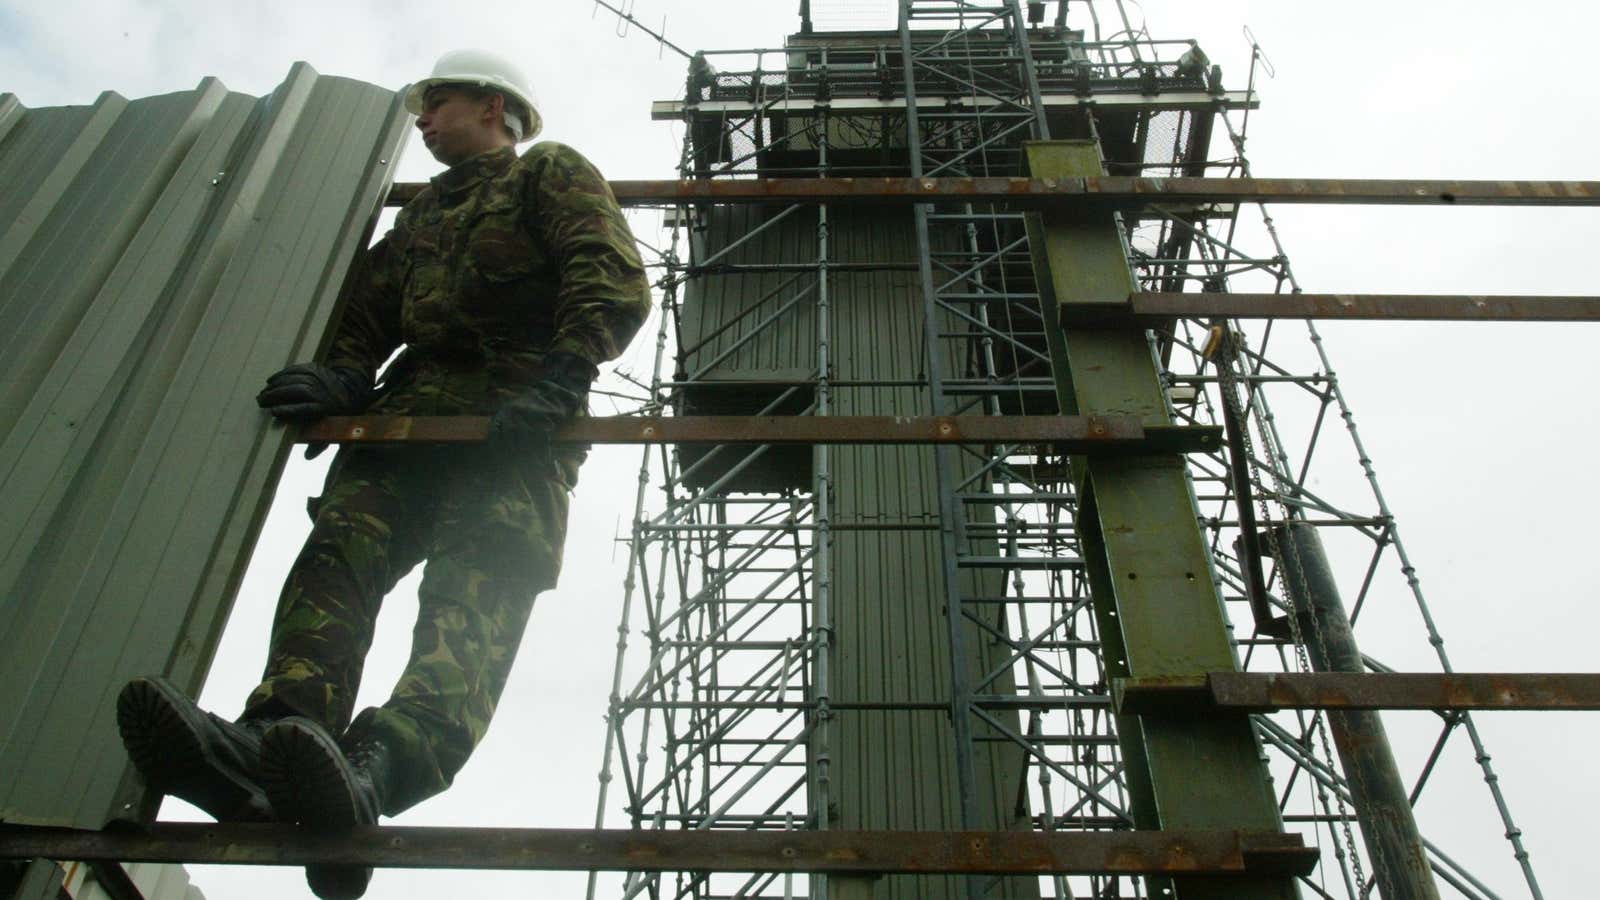 A British army sapper carries out demolition work at the border.